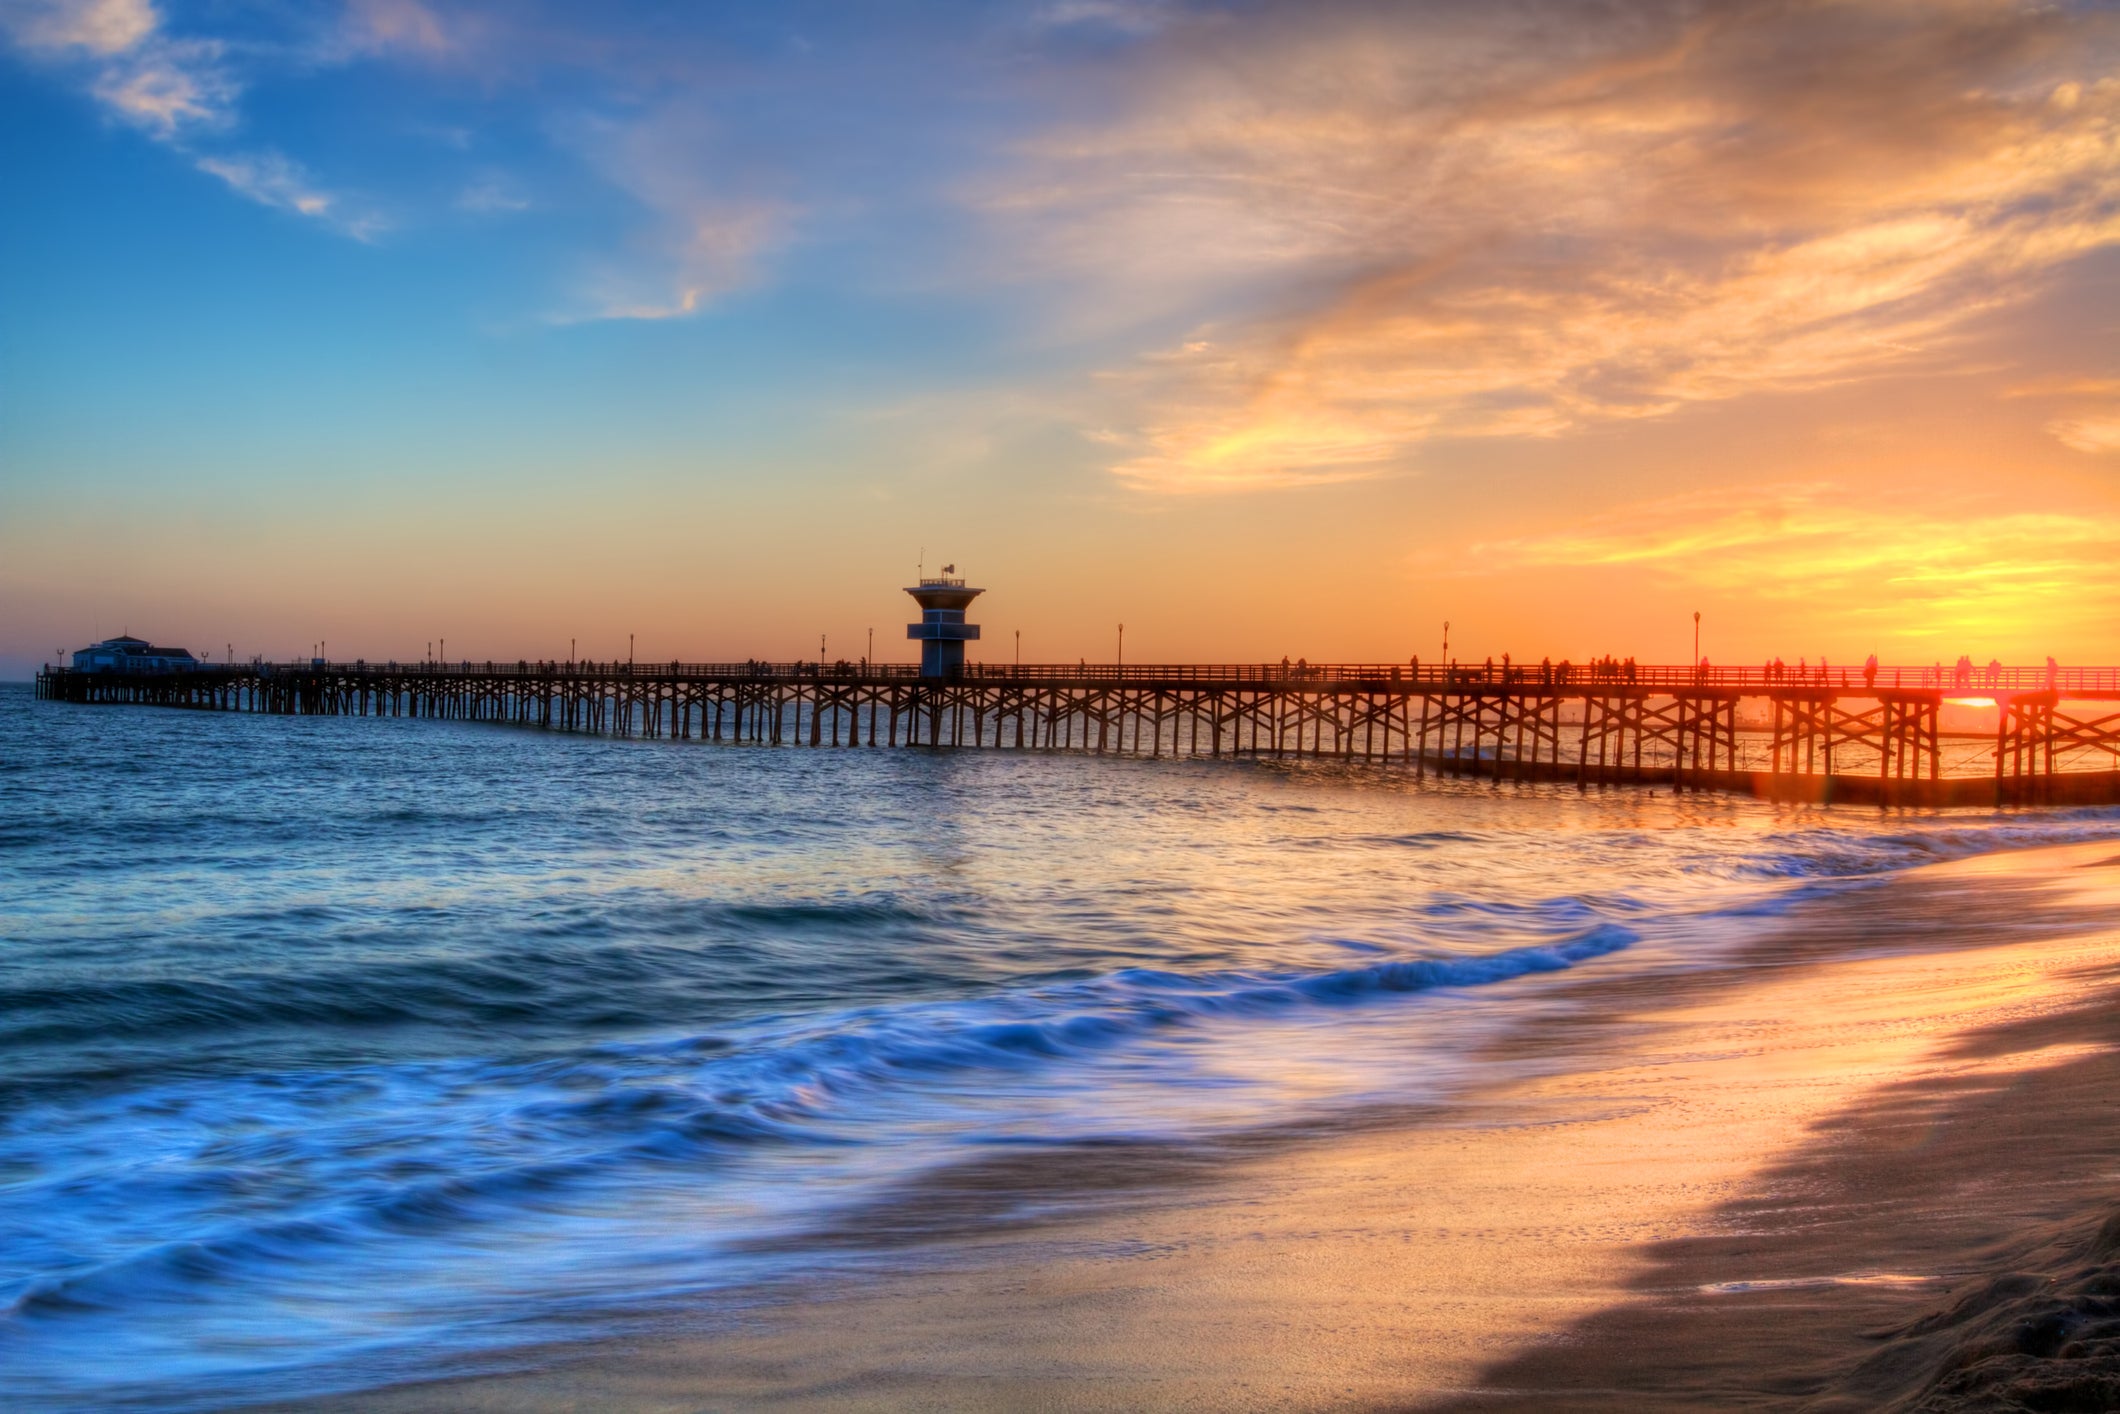 Seal Beach is a laid-back town south of LA’s Long Beach